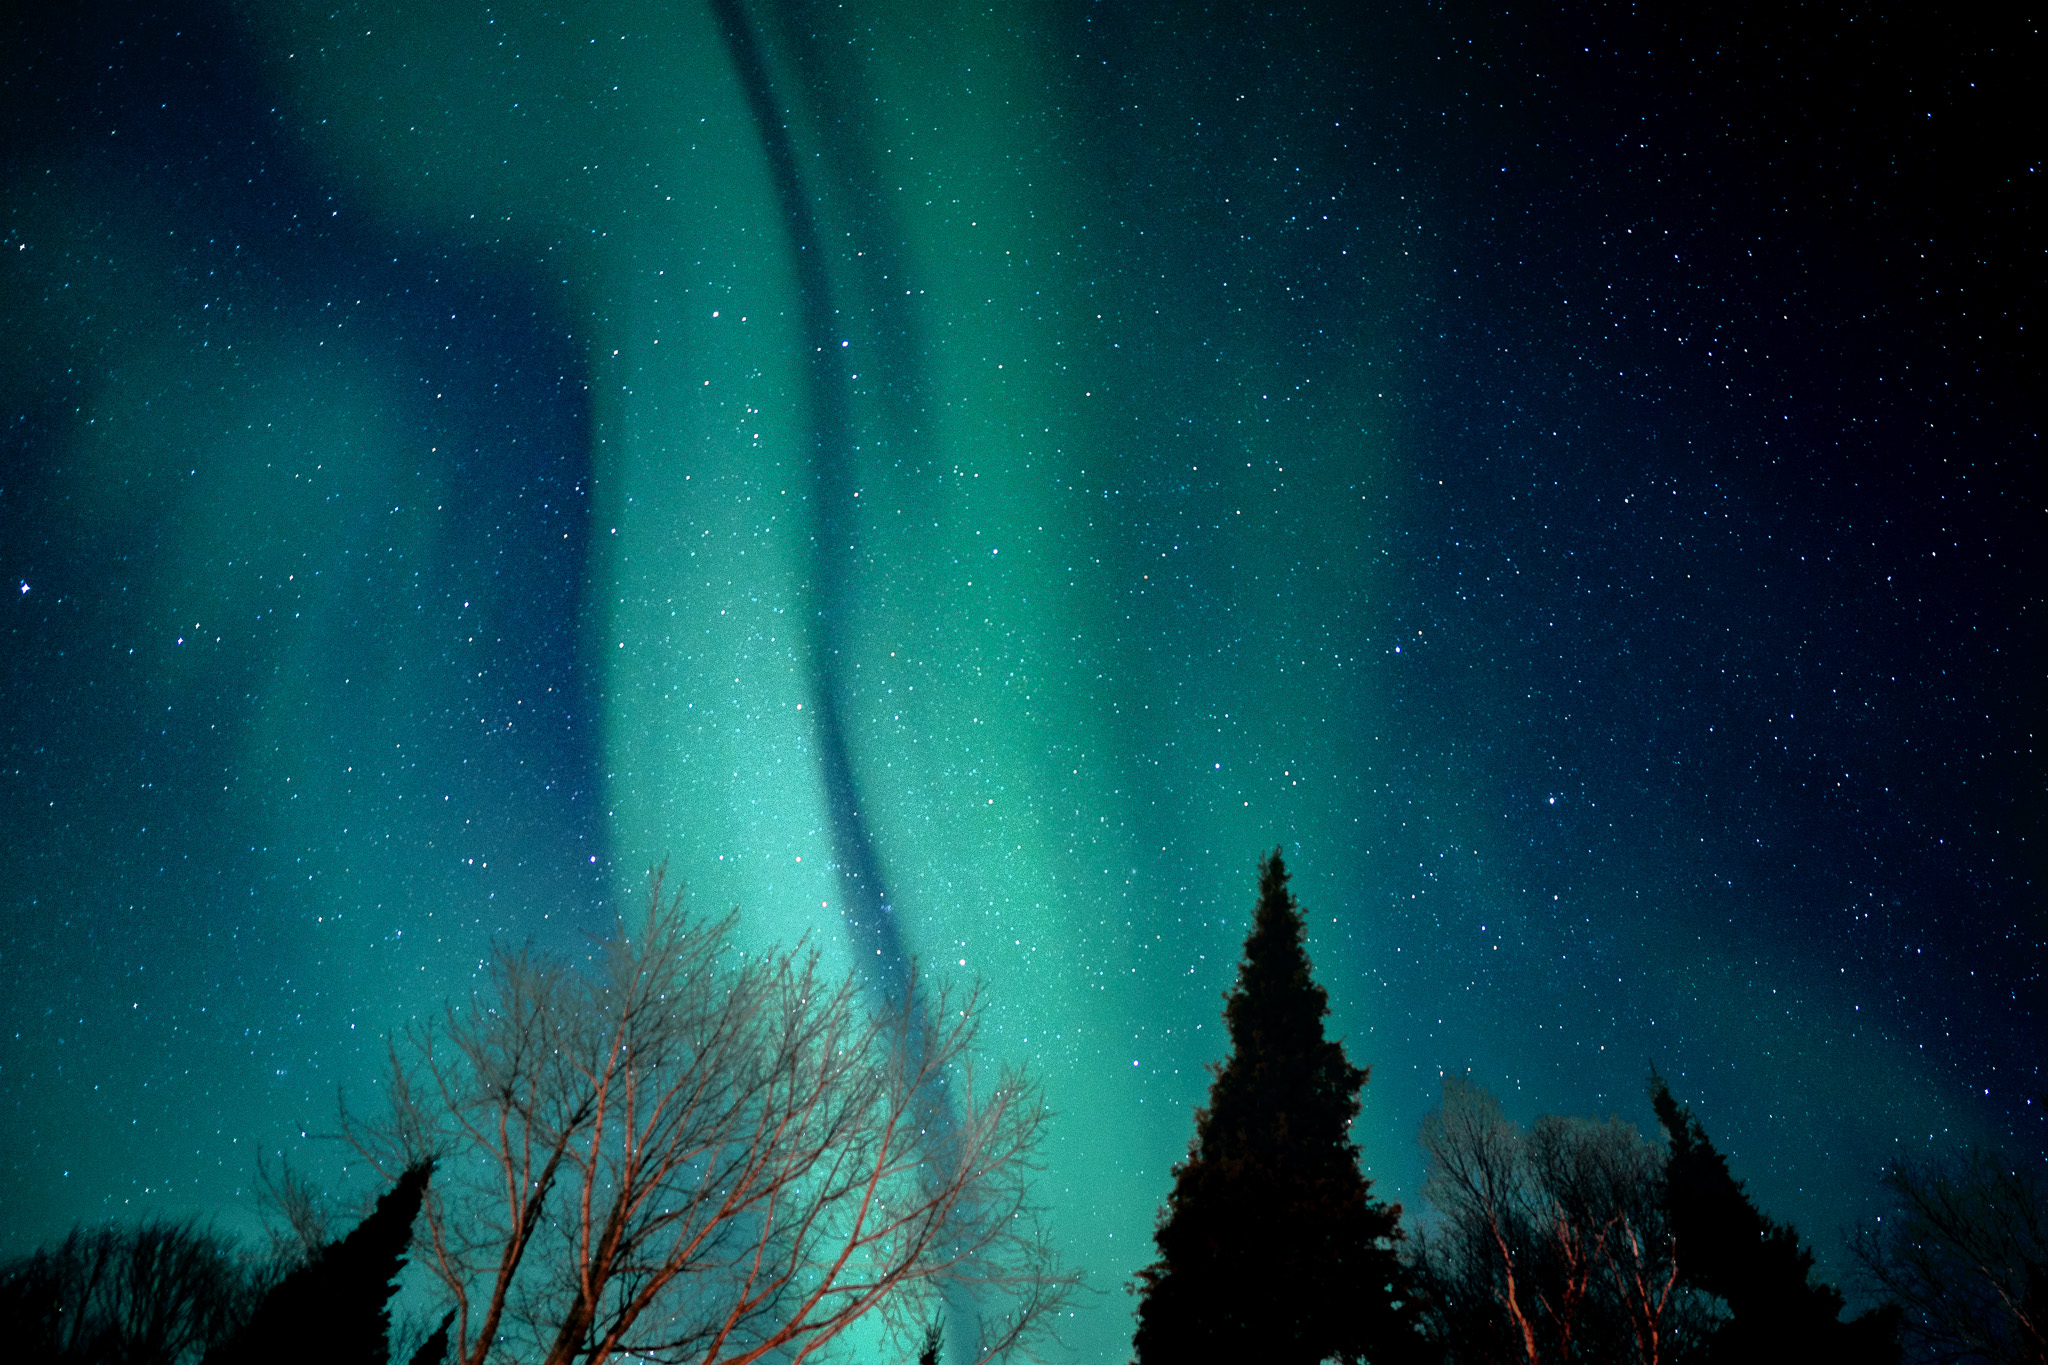 A Guide to Viewing and Photographing the Northern Lights on the Keweenaw Peninsula